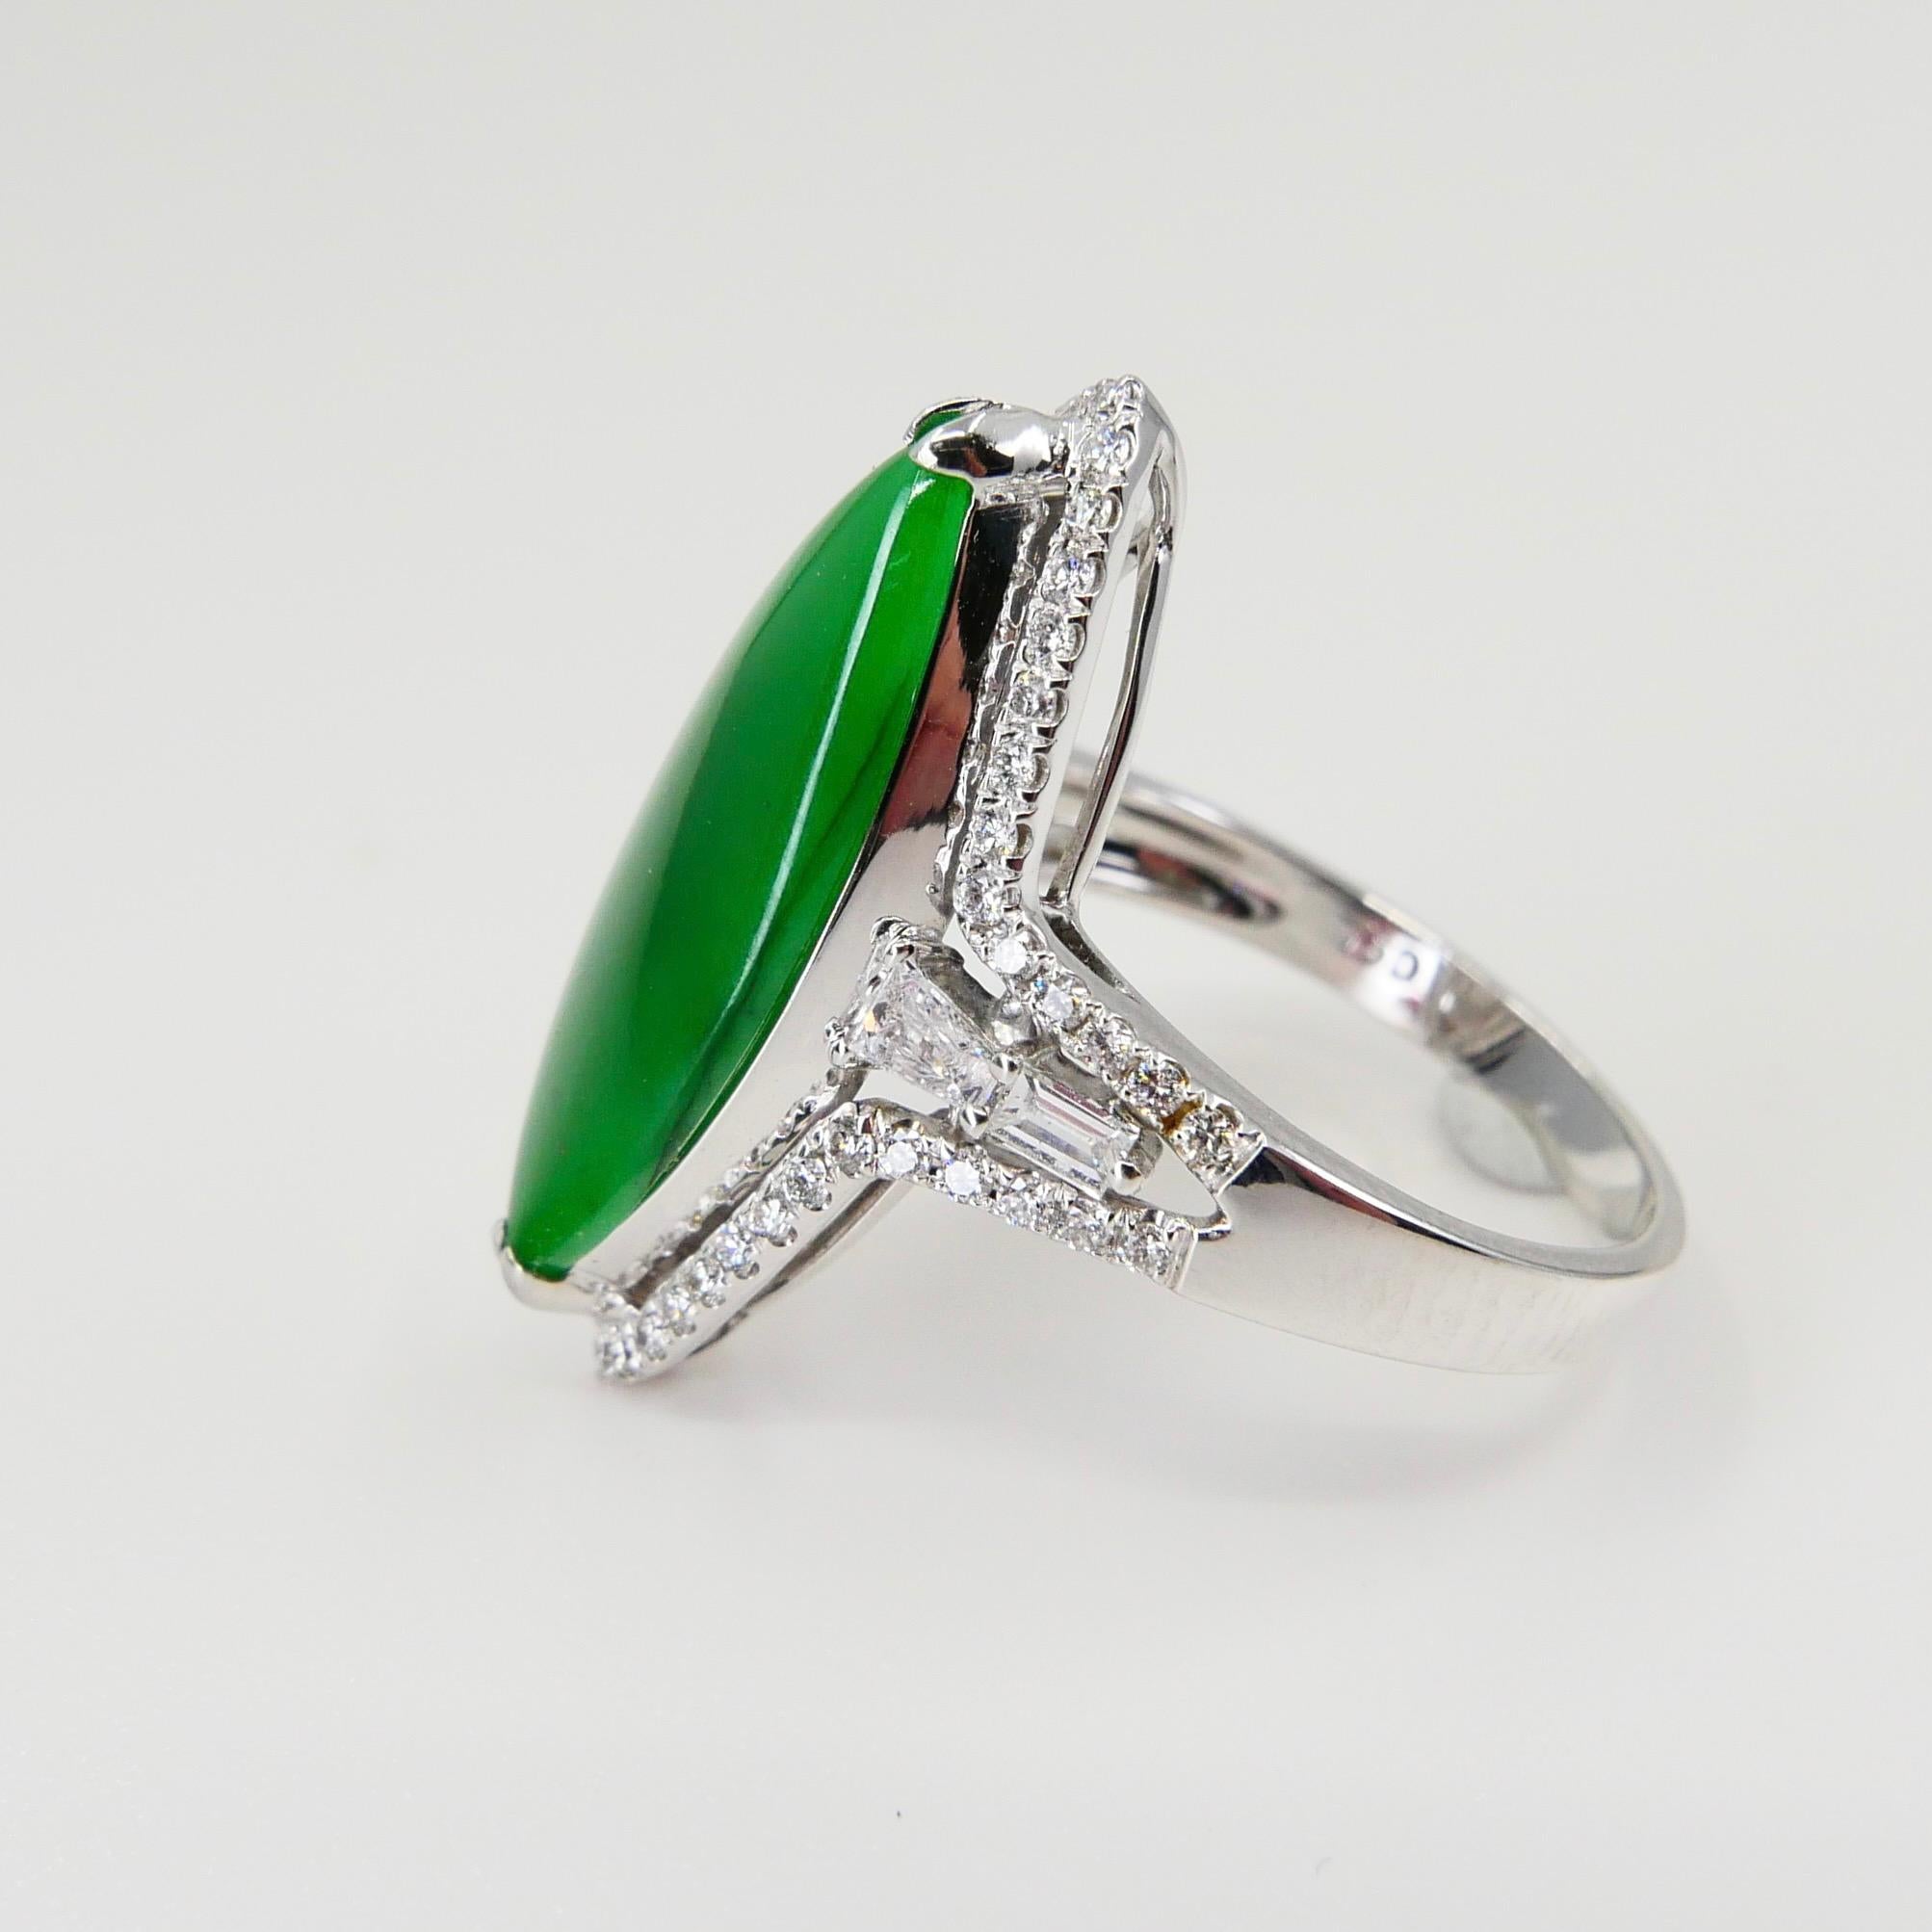 Certified Jadeite Jade and Diamond Cocktail Ring, Intense Apple Green Color For Sale 1